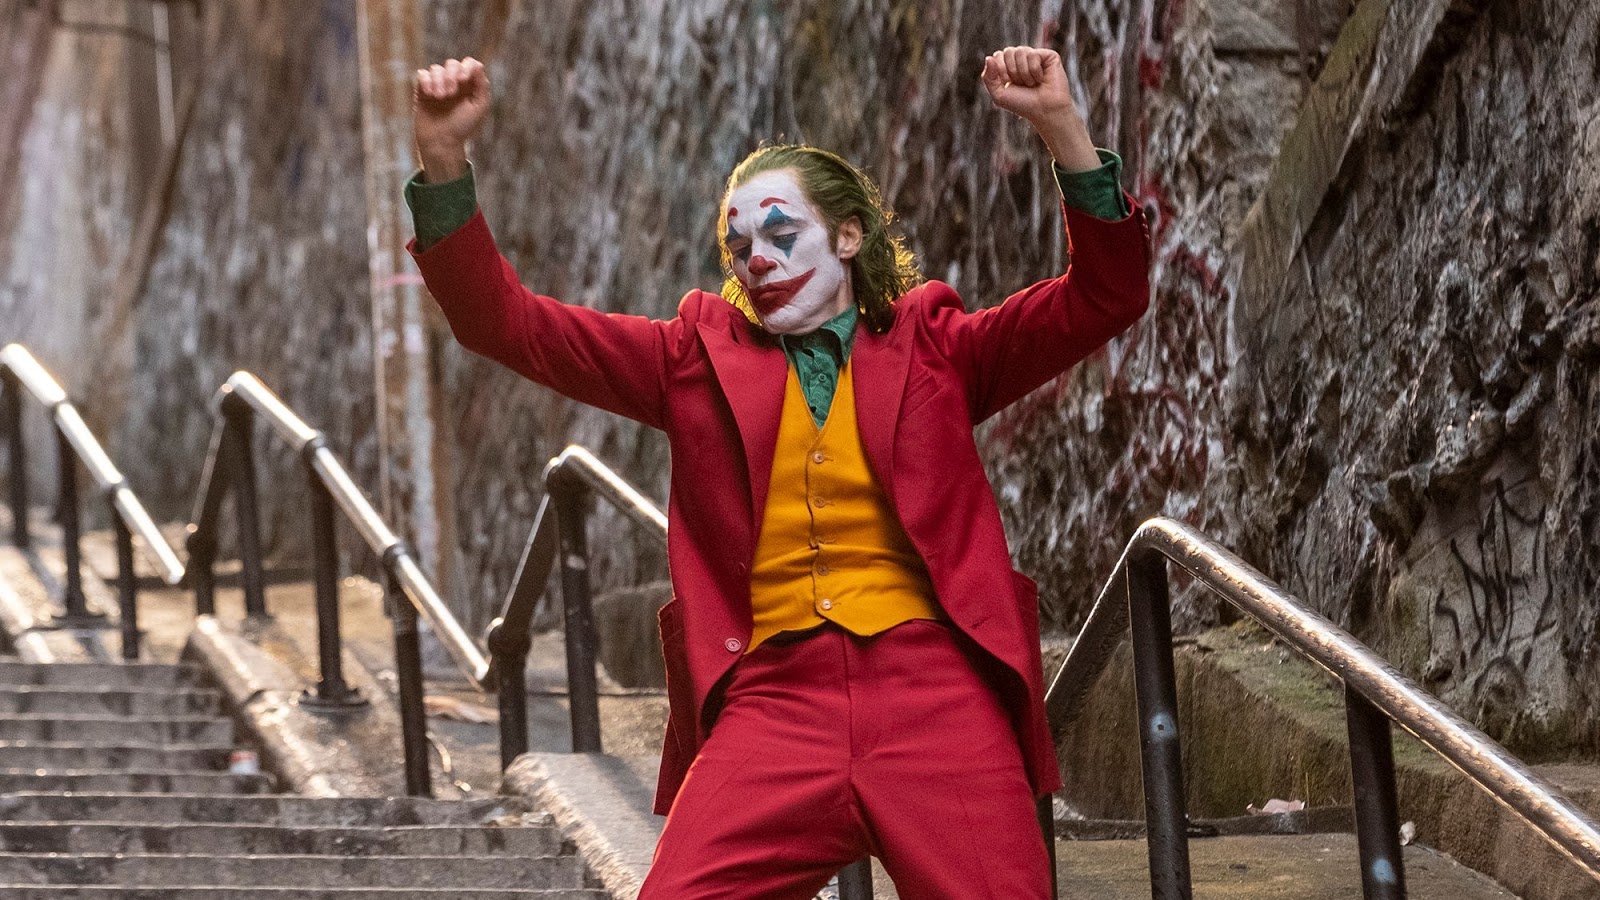 This Way Up Joker Review